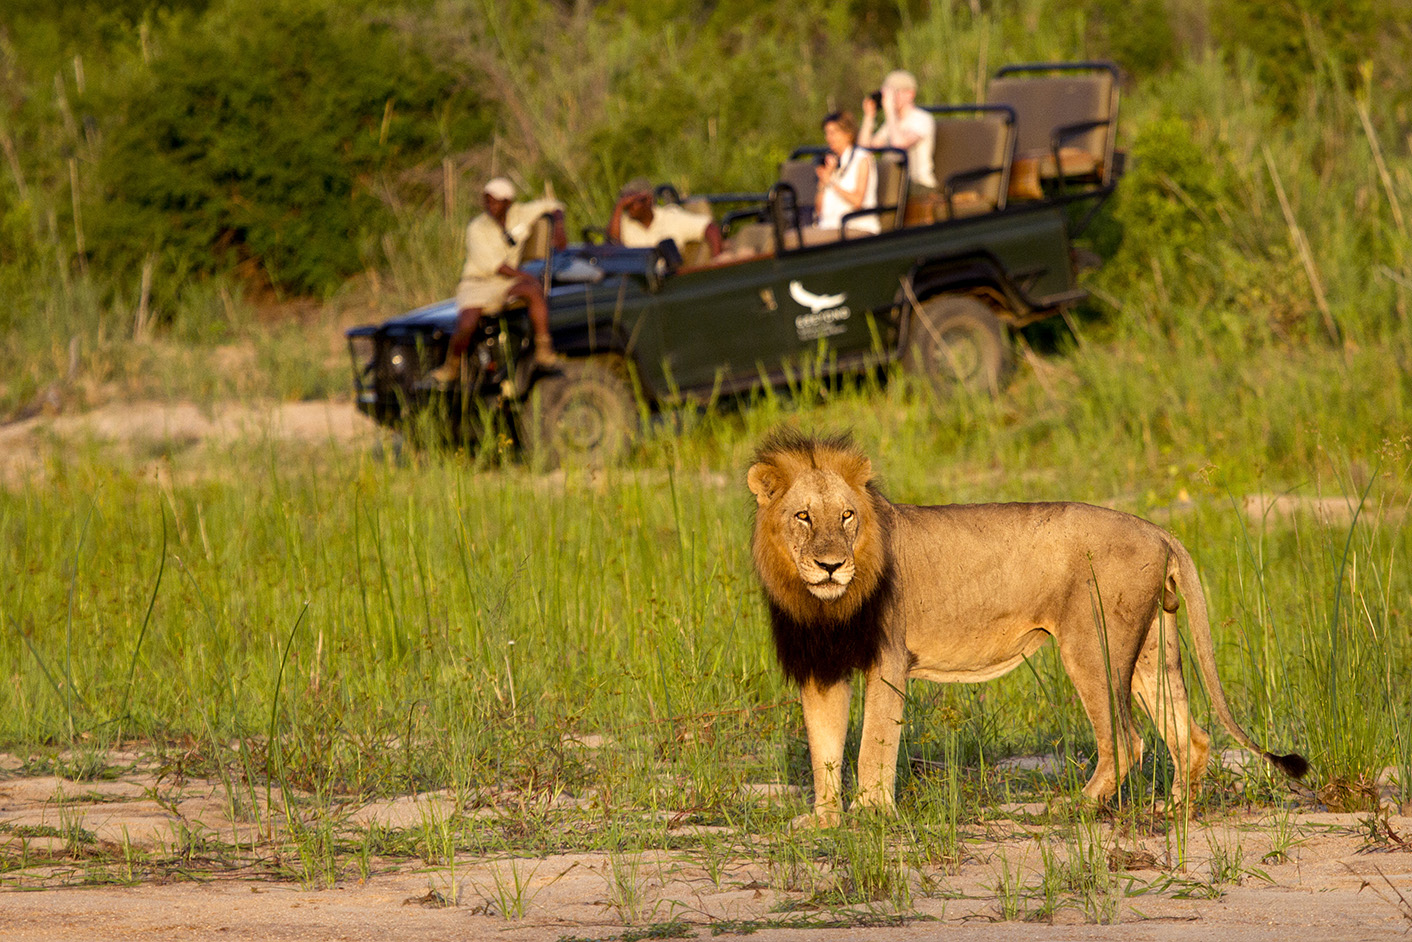 The Best Places to see Wild Lions in Africa! | Ubuntu Travel Group